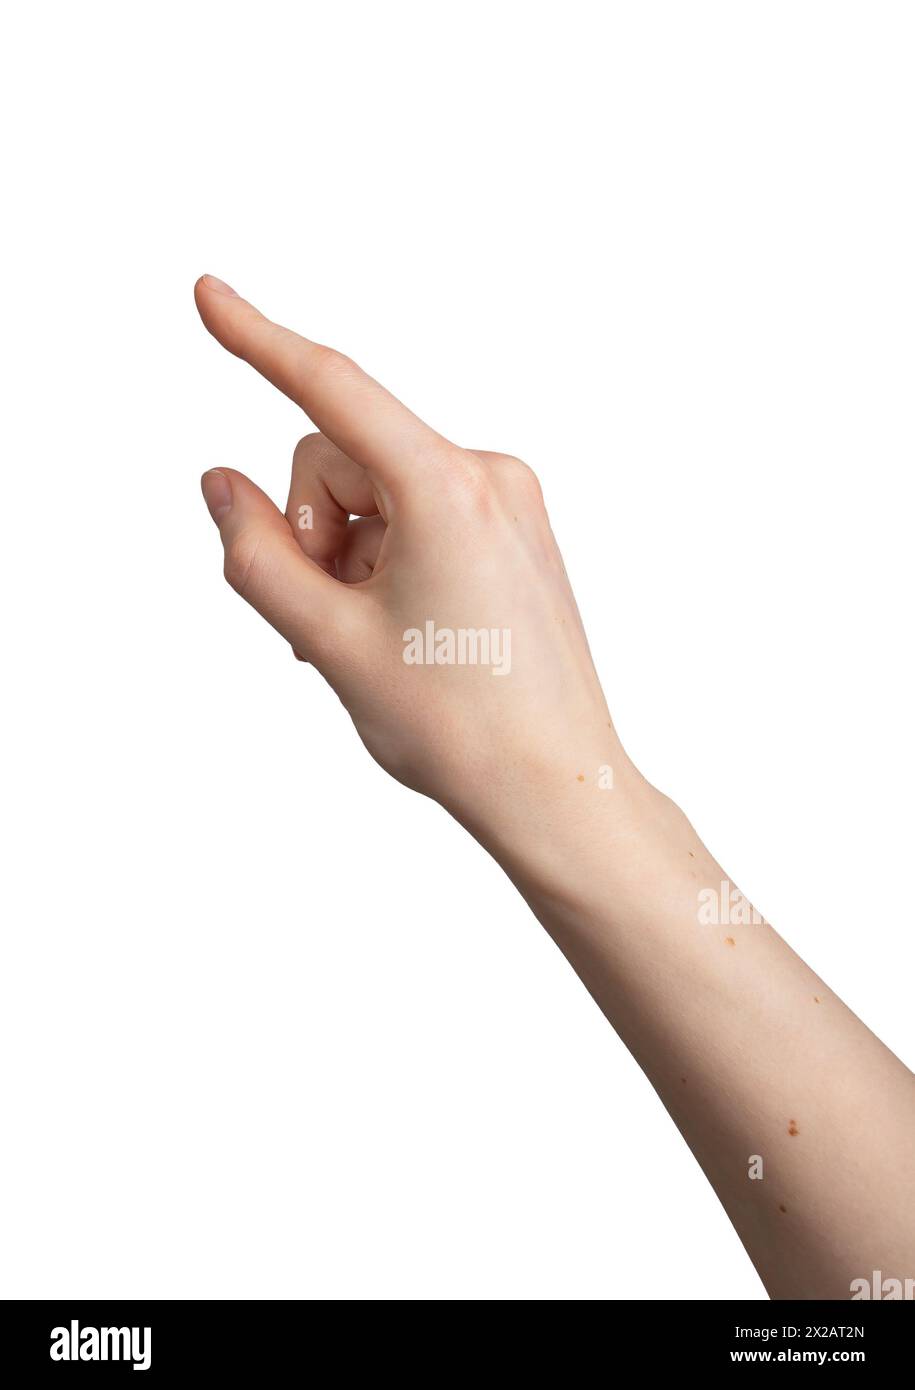 Finger touching, clicking, tapping, hand gesture isolated on white background. Stock Photo